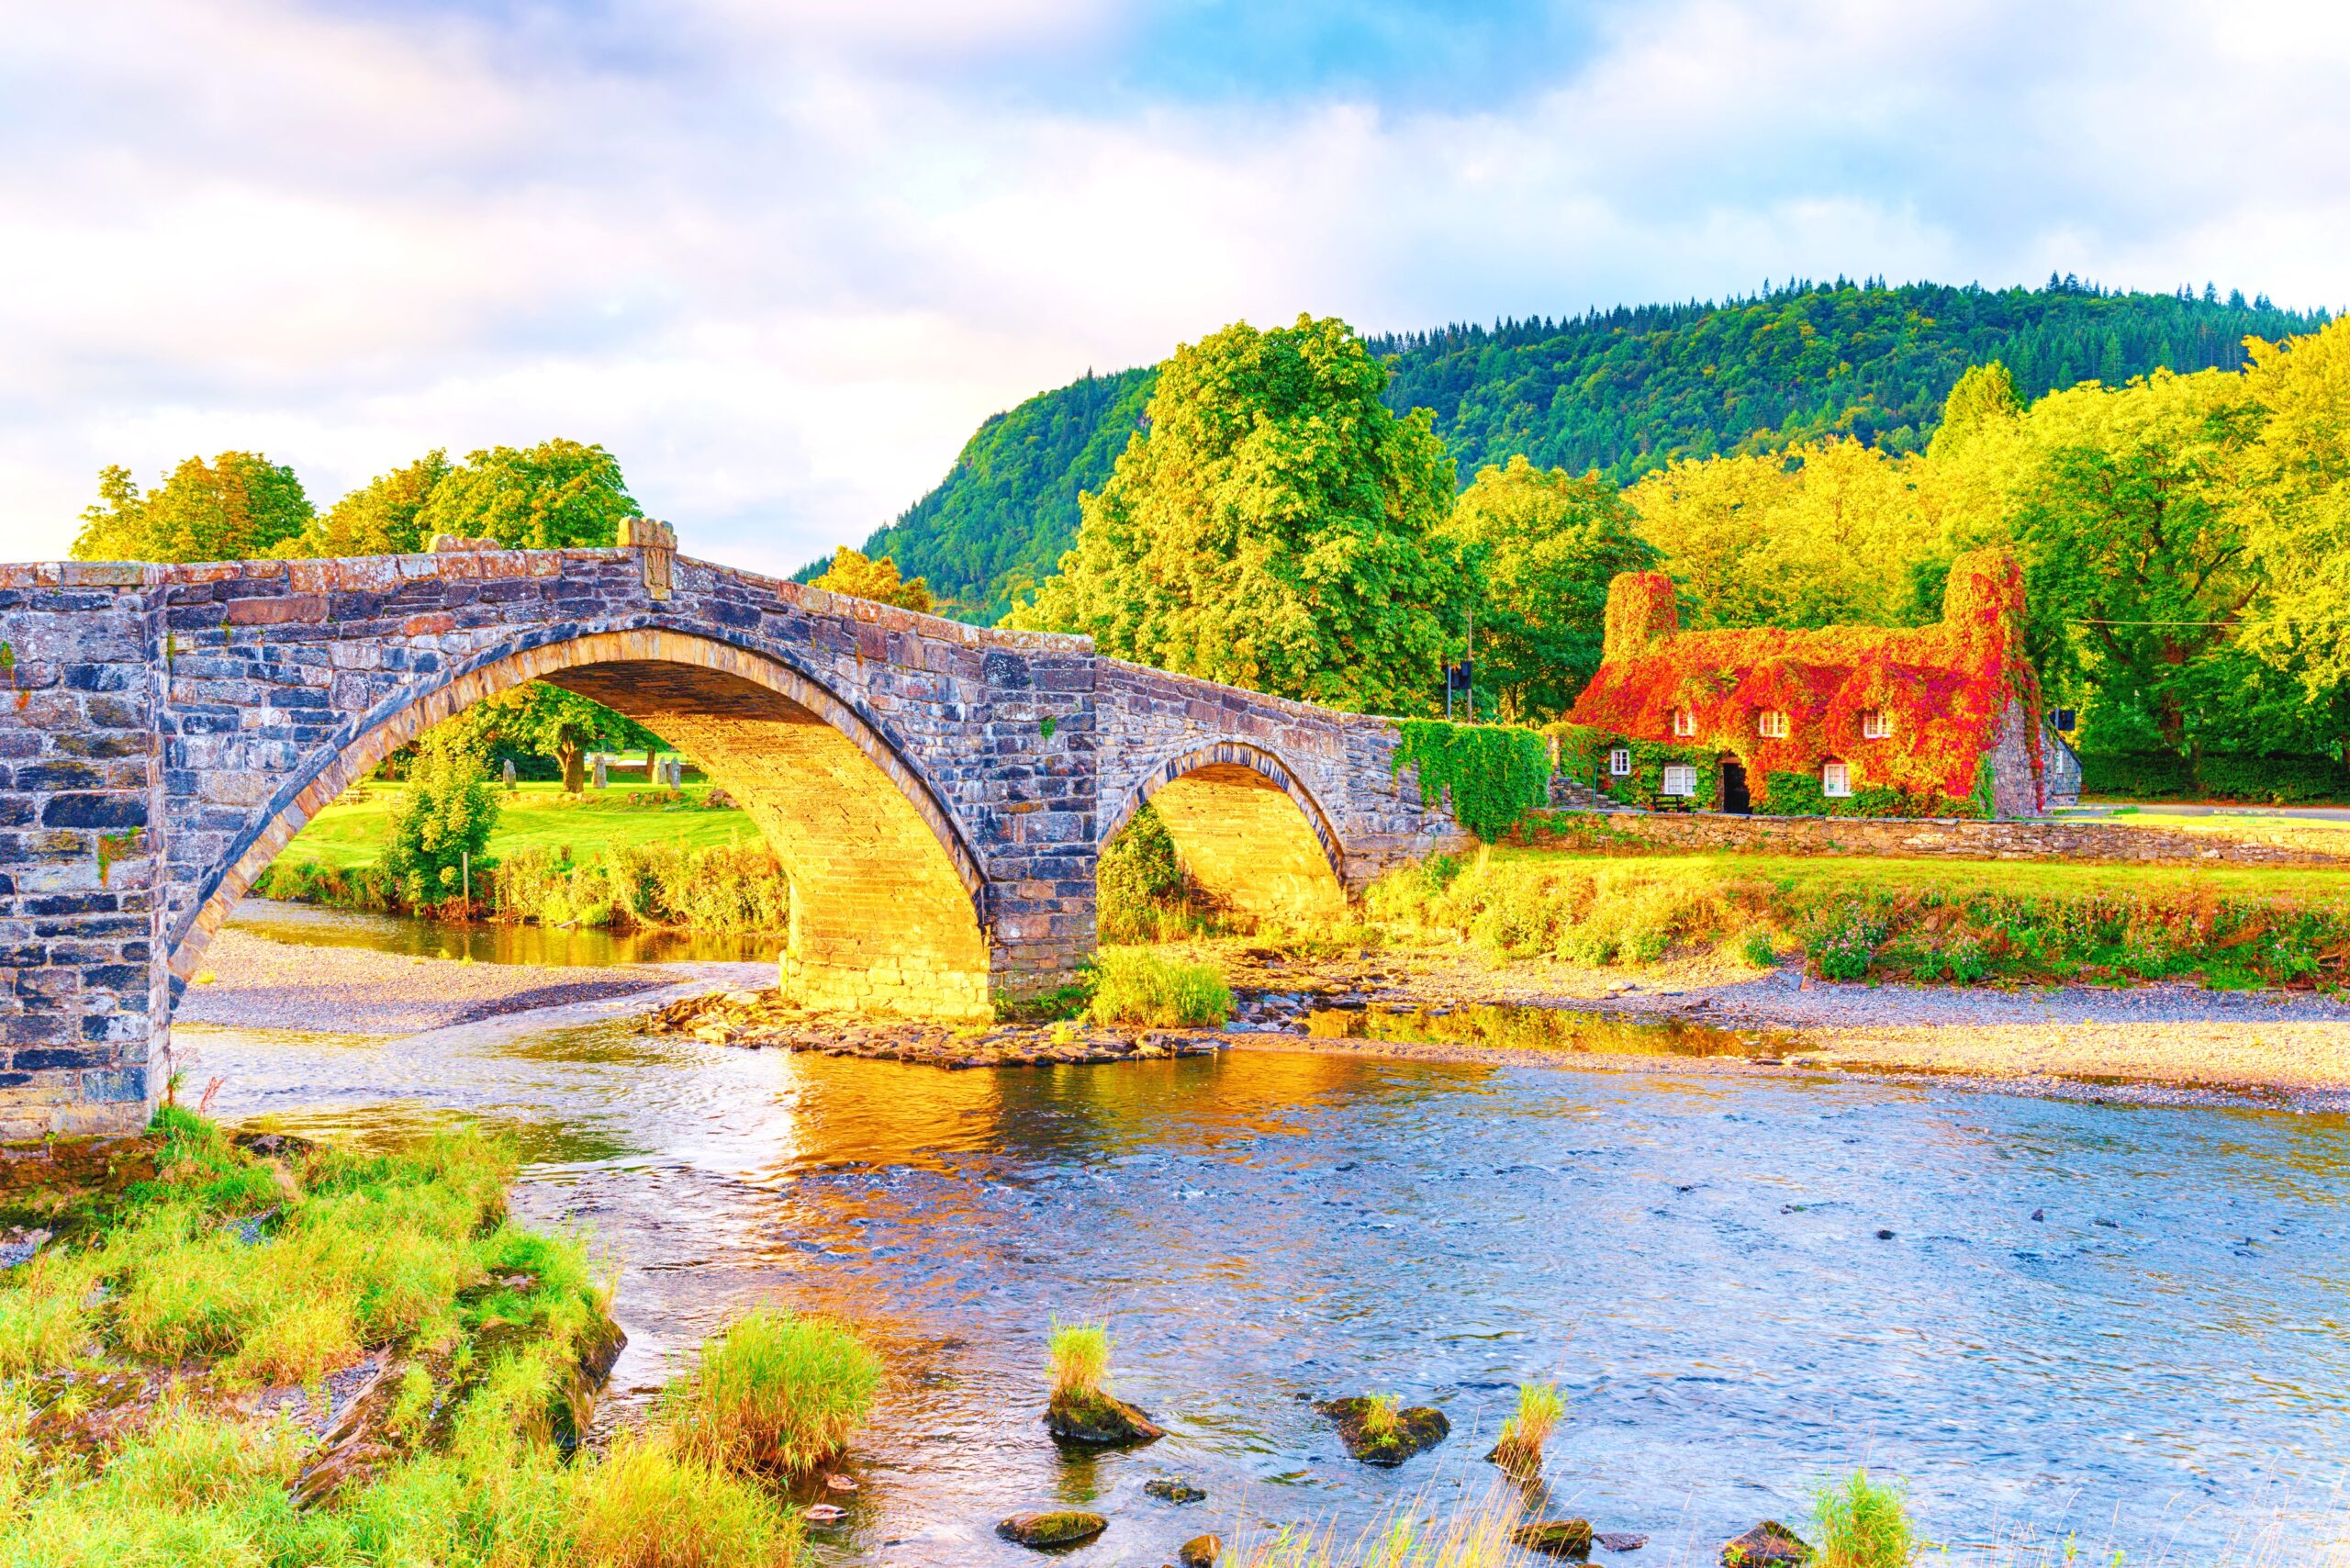 <img src="red.jpg" alt="red house in Wales by the river"/>